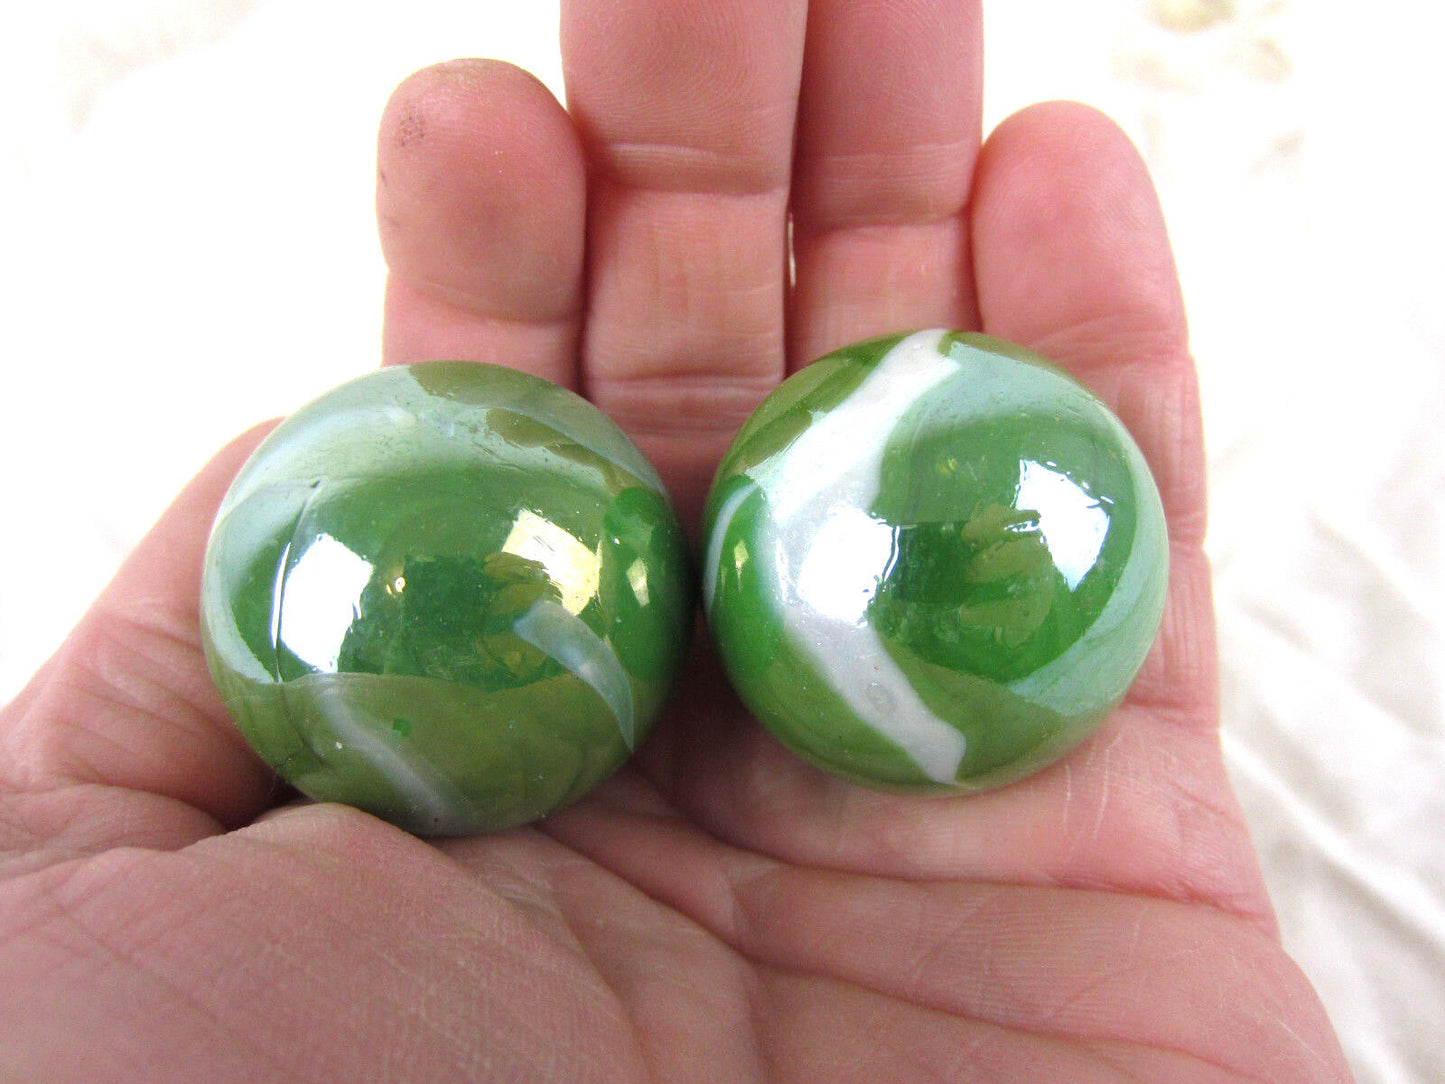 2 Boulders 35mm (1 3/8") FUNGUS Marbles glass ball Green White Iridescent large Swirl